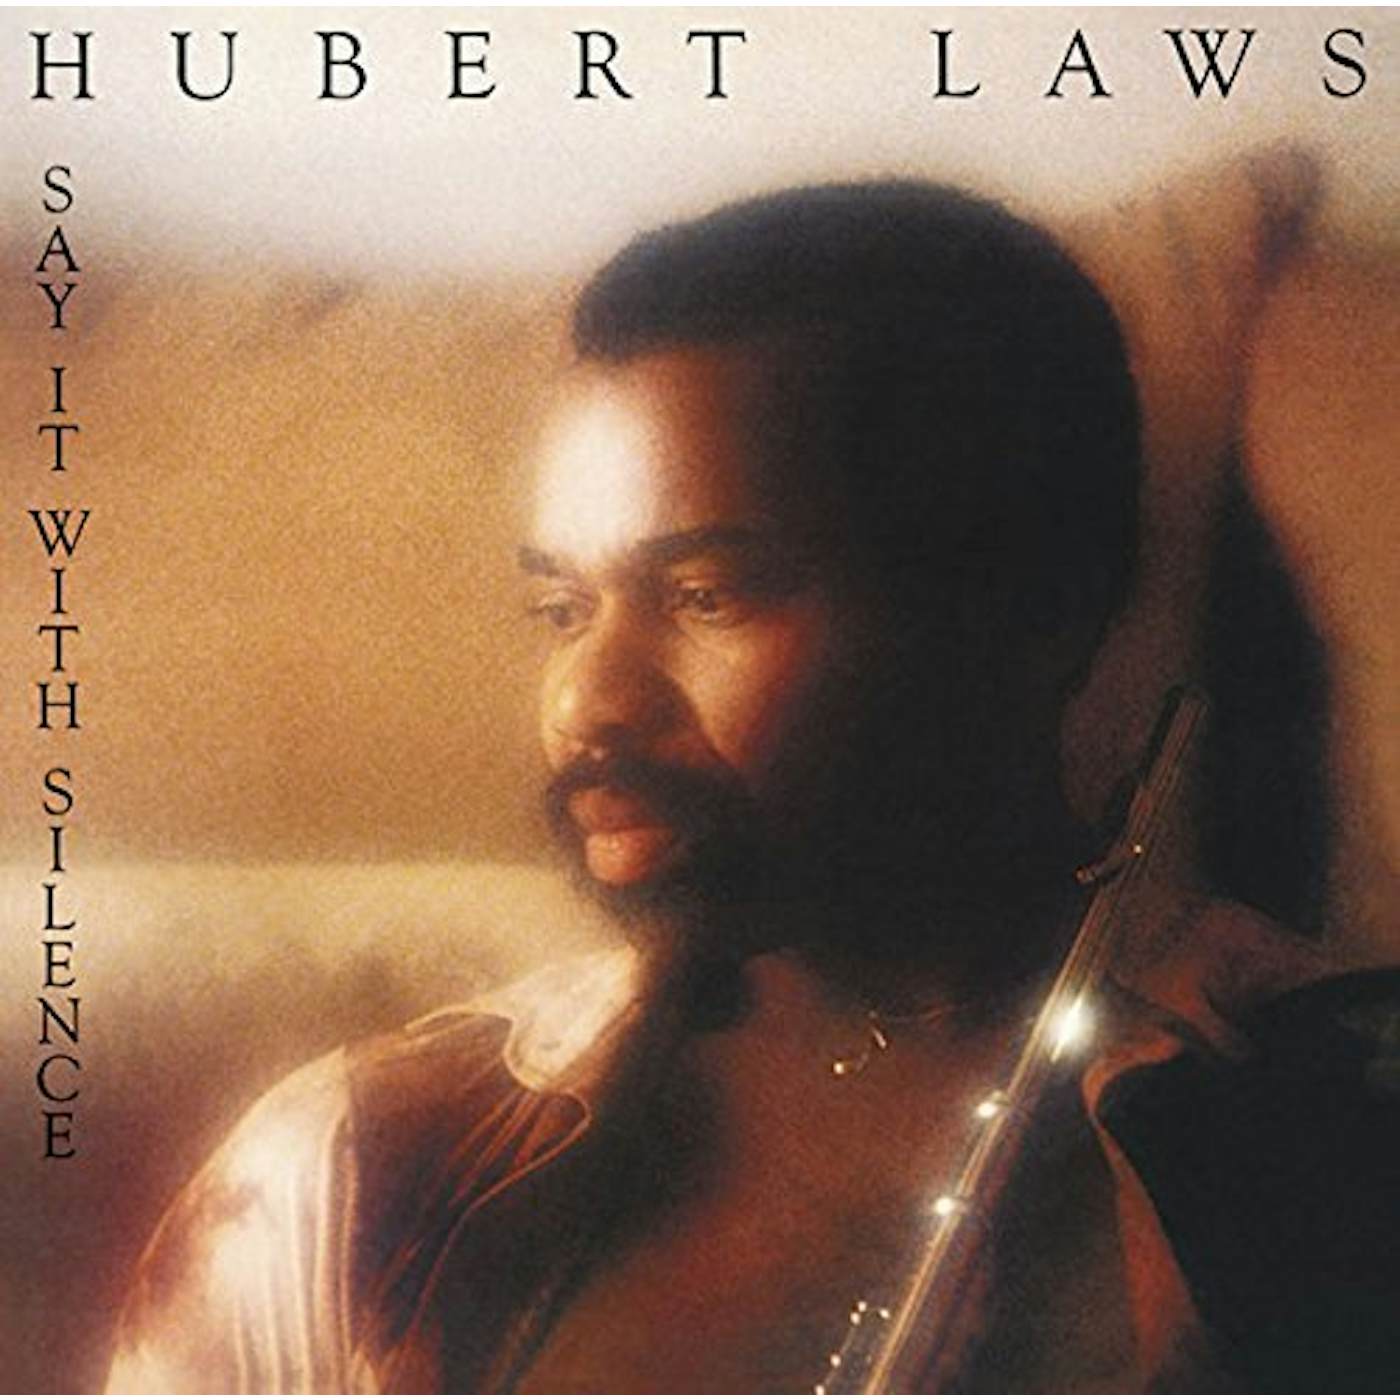 Hubert Laws SAY IT WITH SILENCE CD